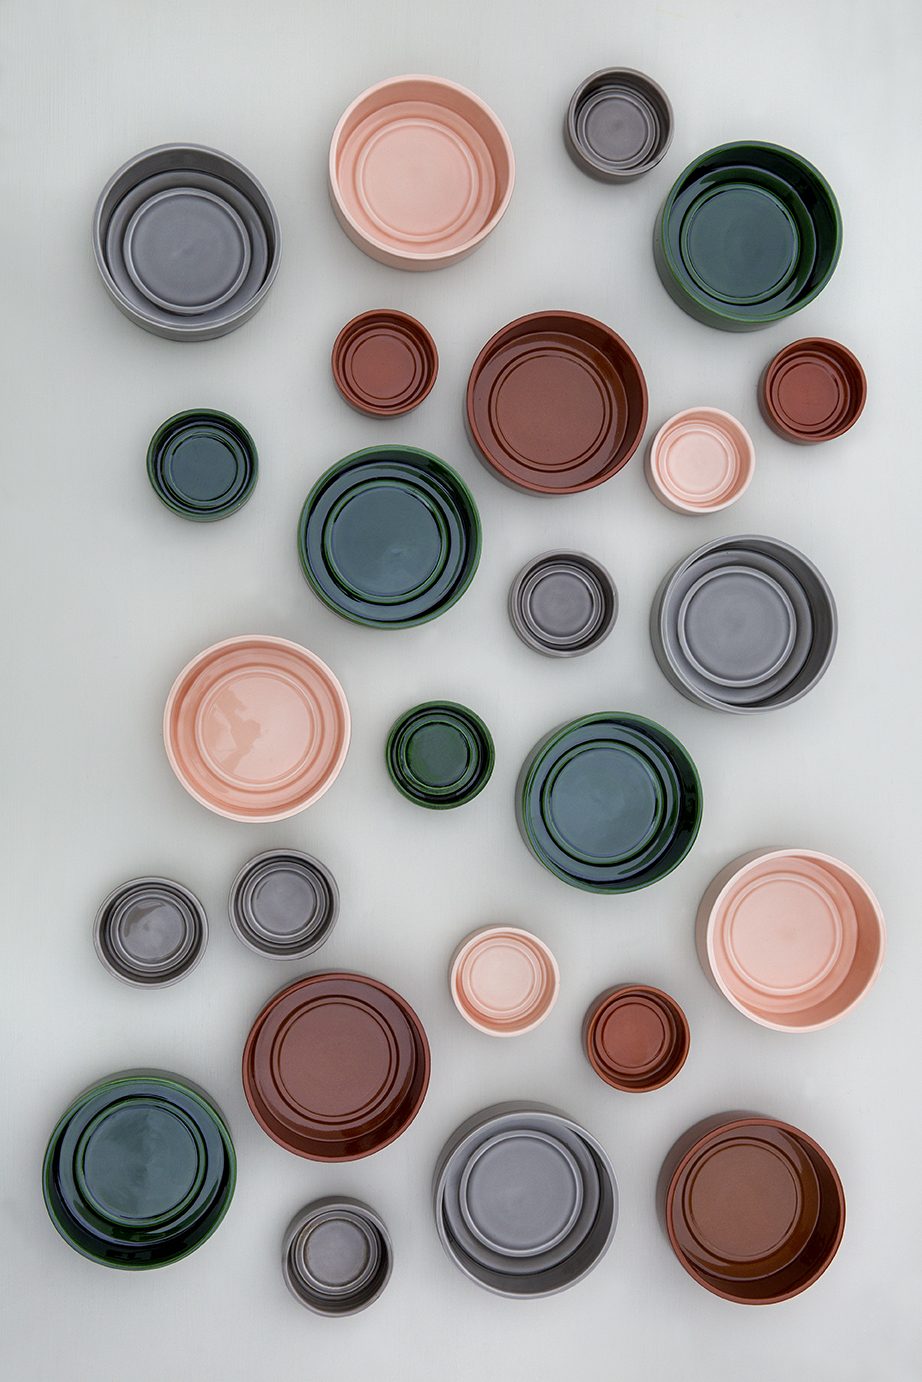 Collection of raw and glazed saucers in different colors seen from above.